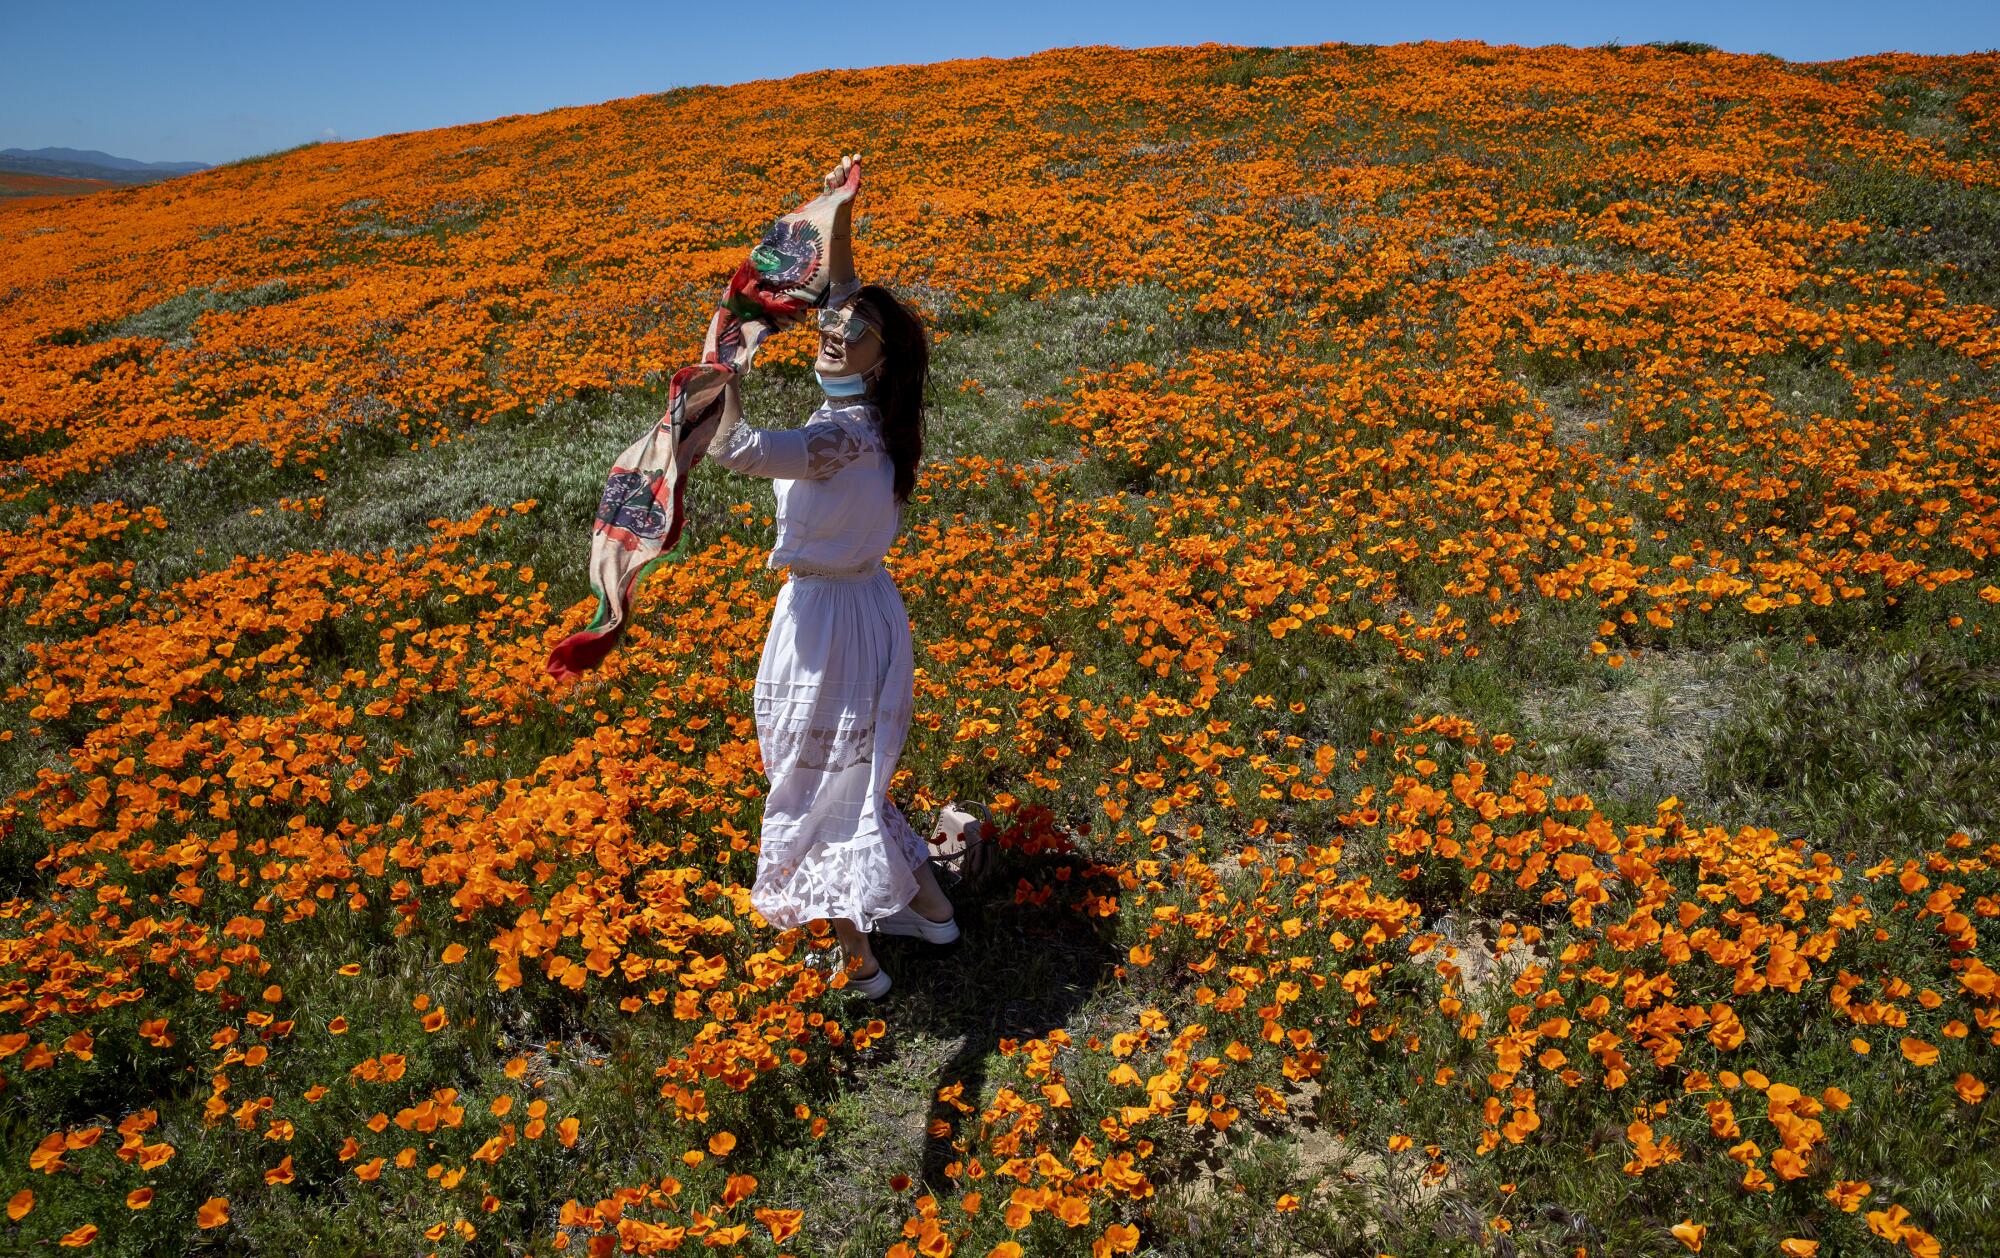  Vivi Zhao of Santa Monica dances among blooming California poppies in Lancaster outside of the perimeter of the California Poppy State Natural Reserve.